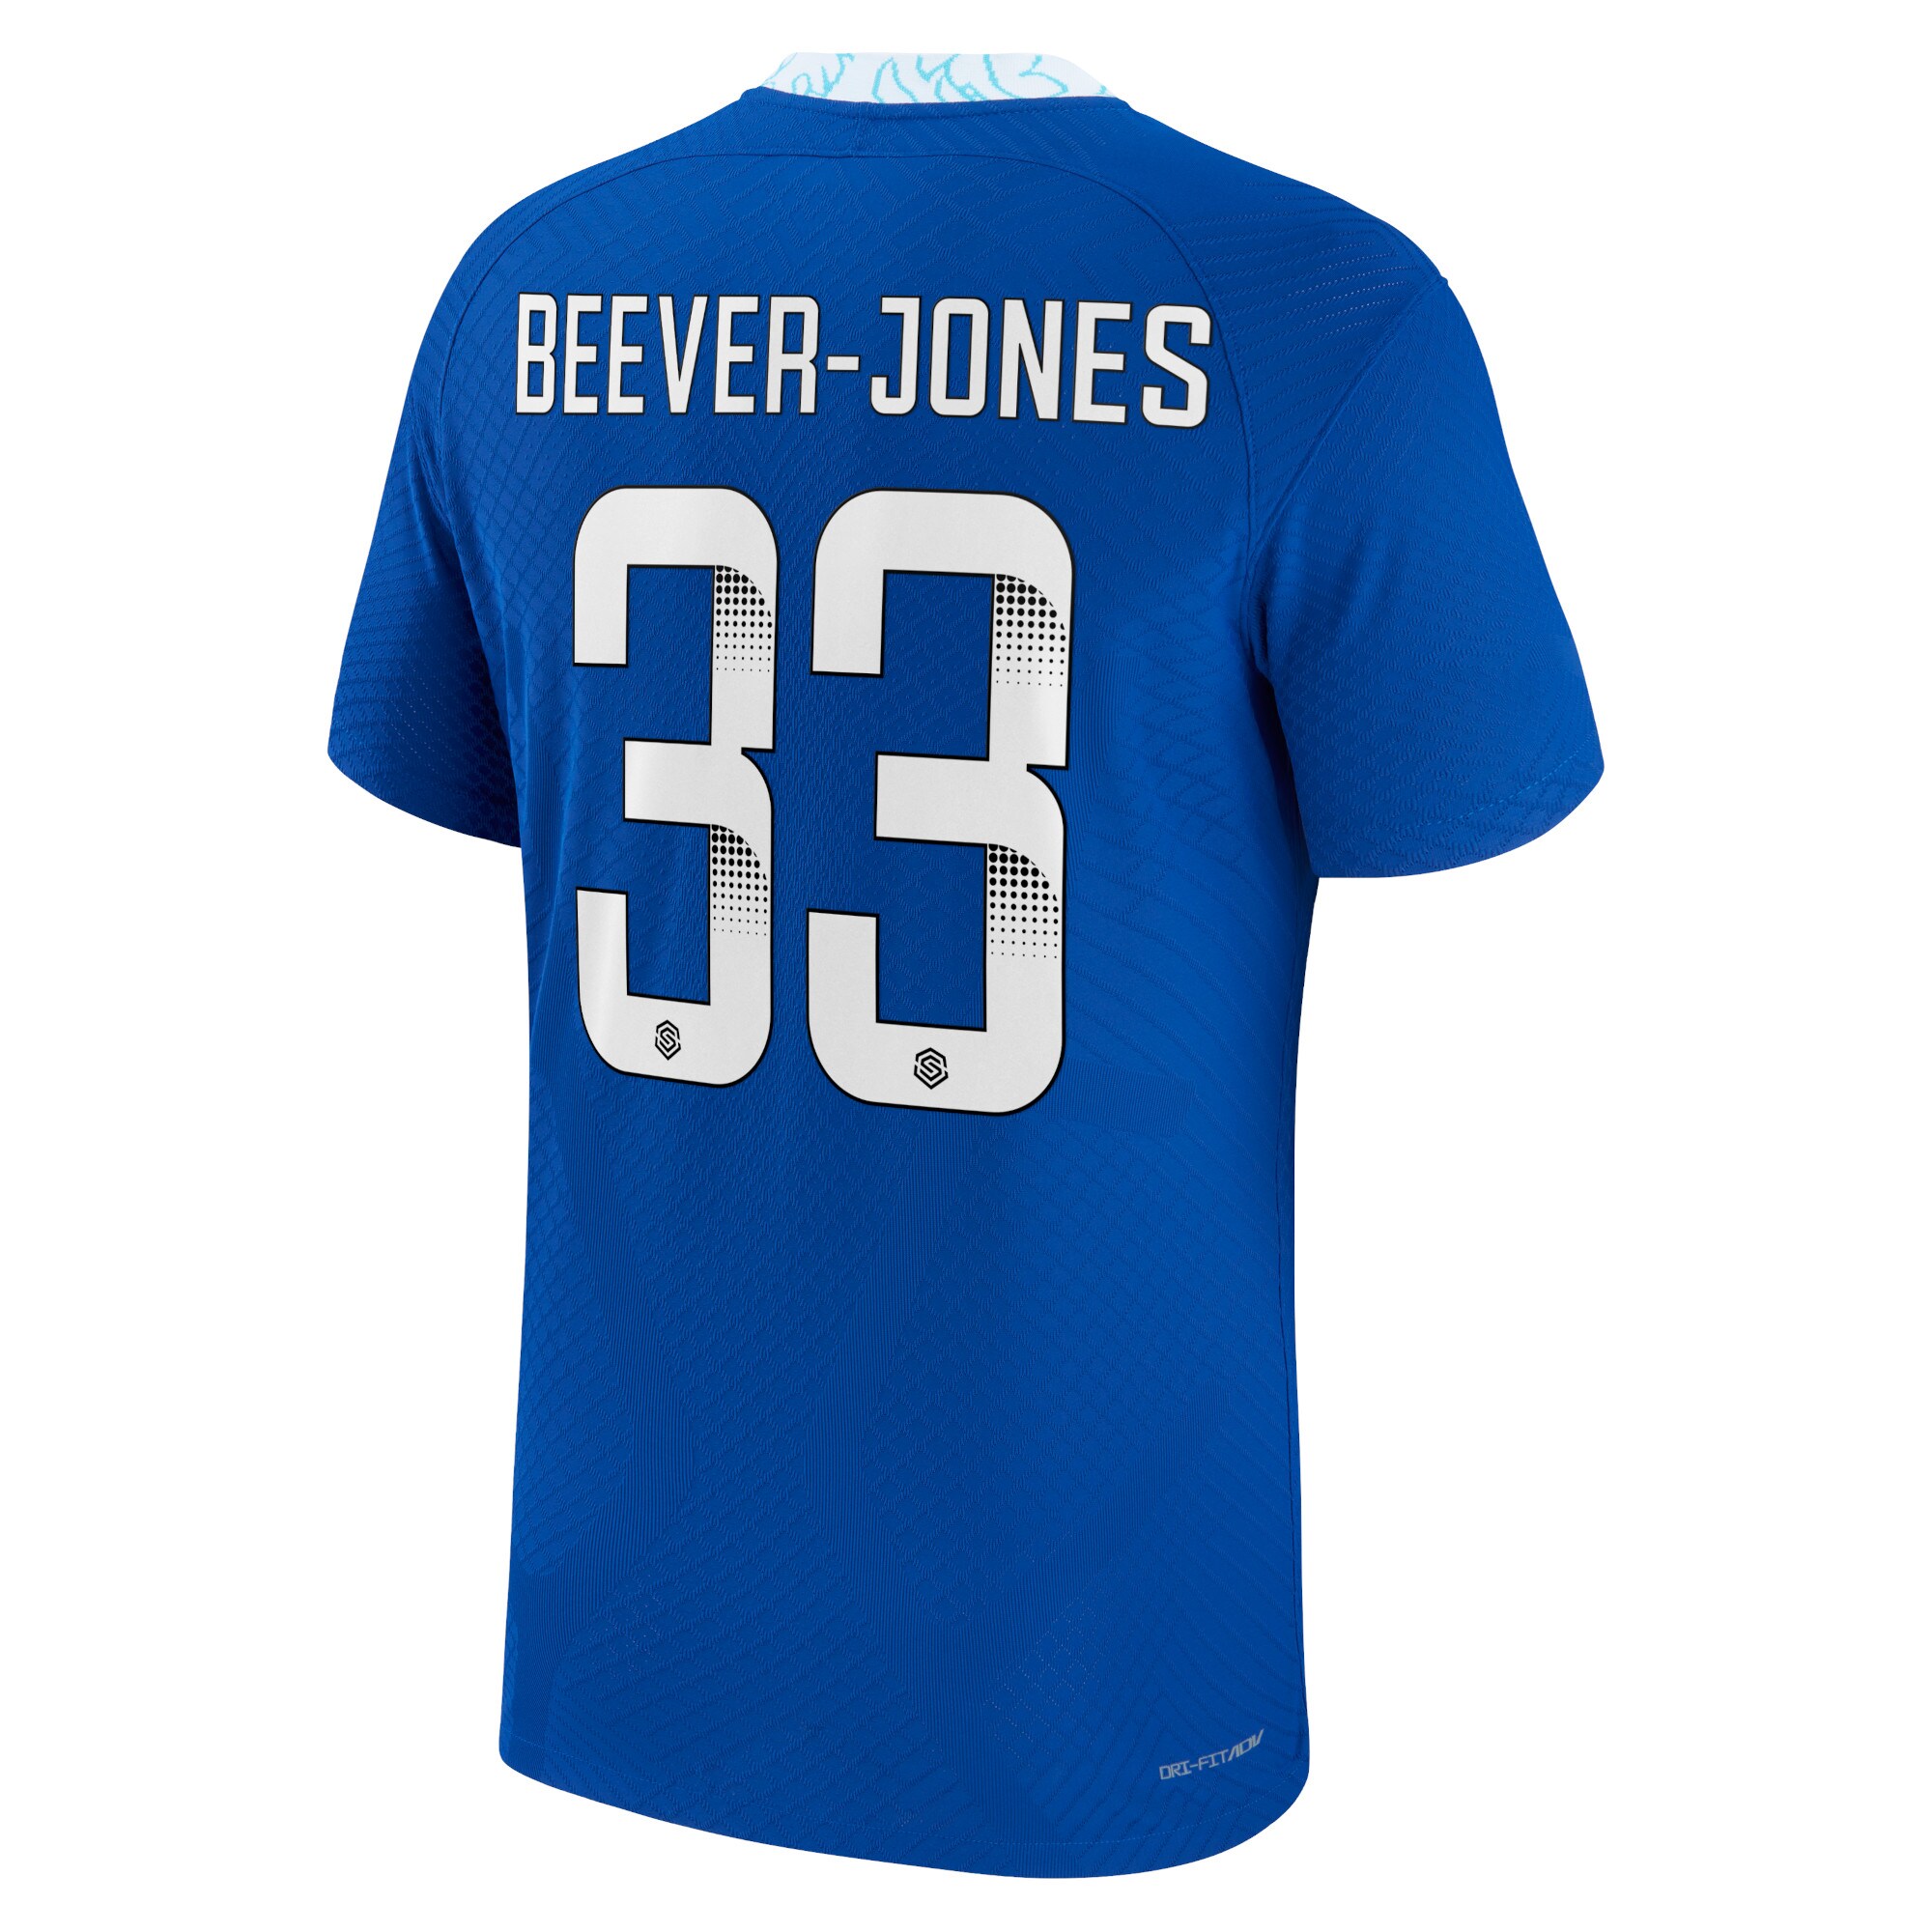 Chelsea WSL Home Vapor Match Shirt 2022-23 with Beever-Jones 33 printing